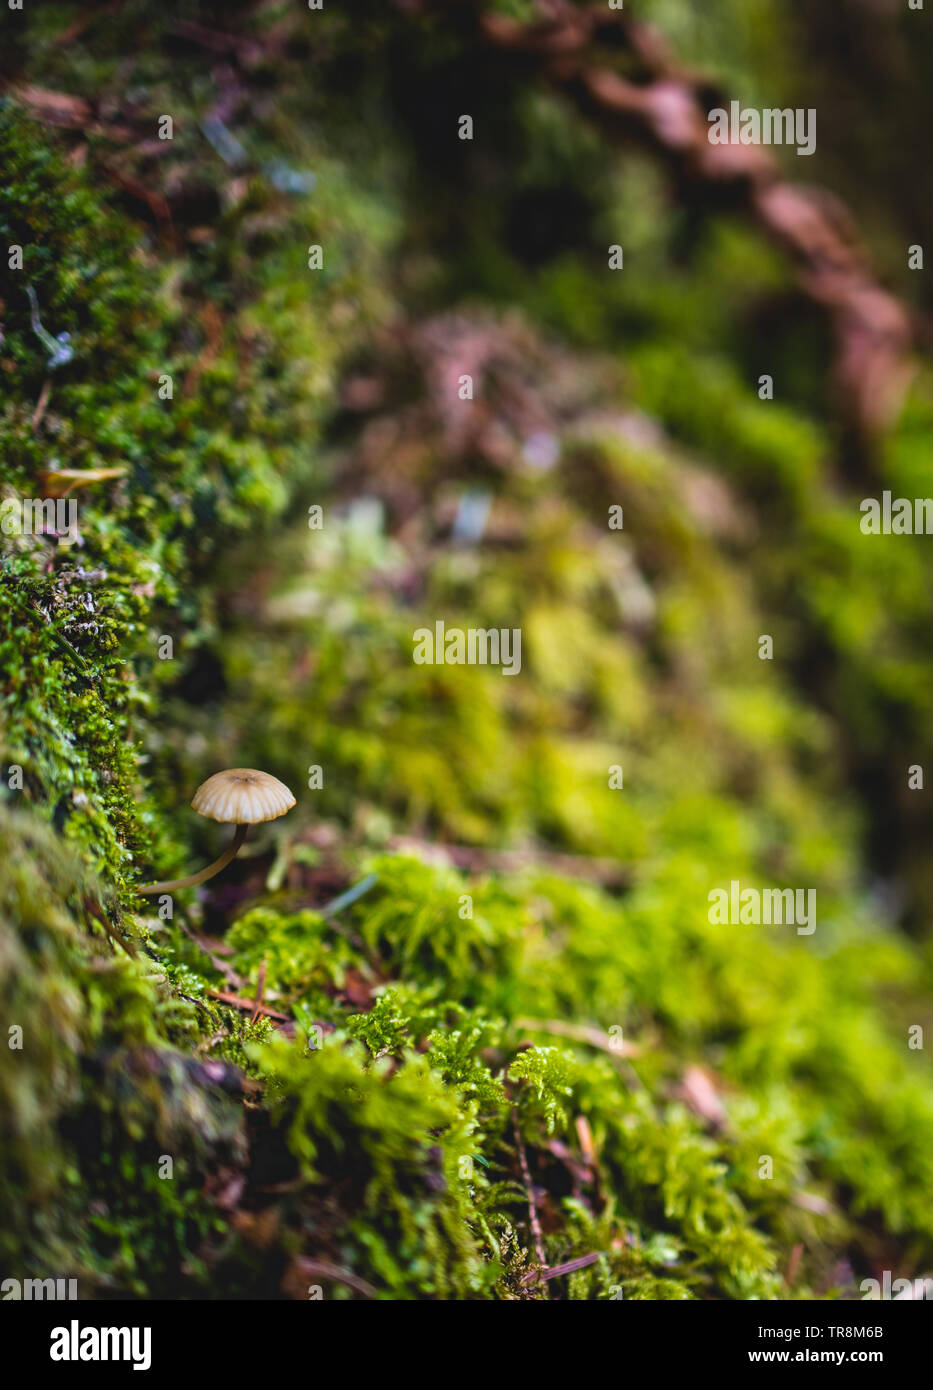 Mushroom (Marasmius oreades) growing within the moss in the forest Stock Photo